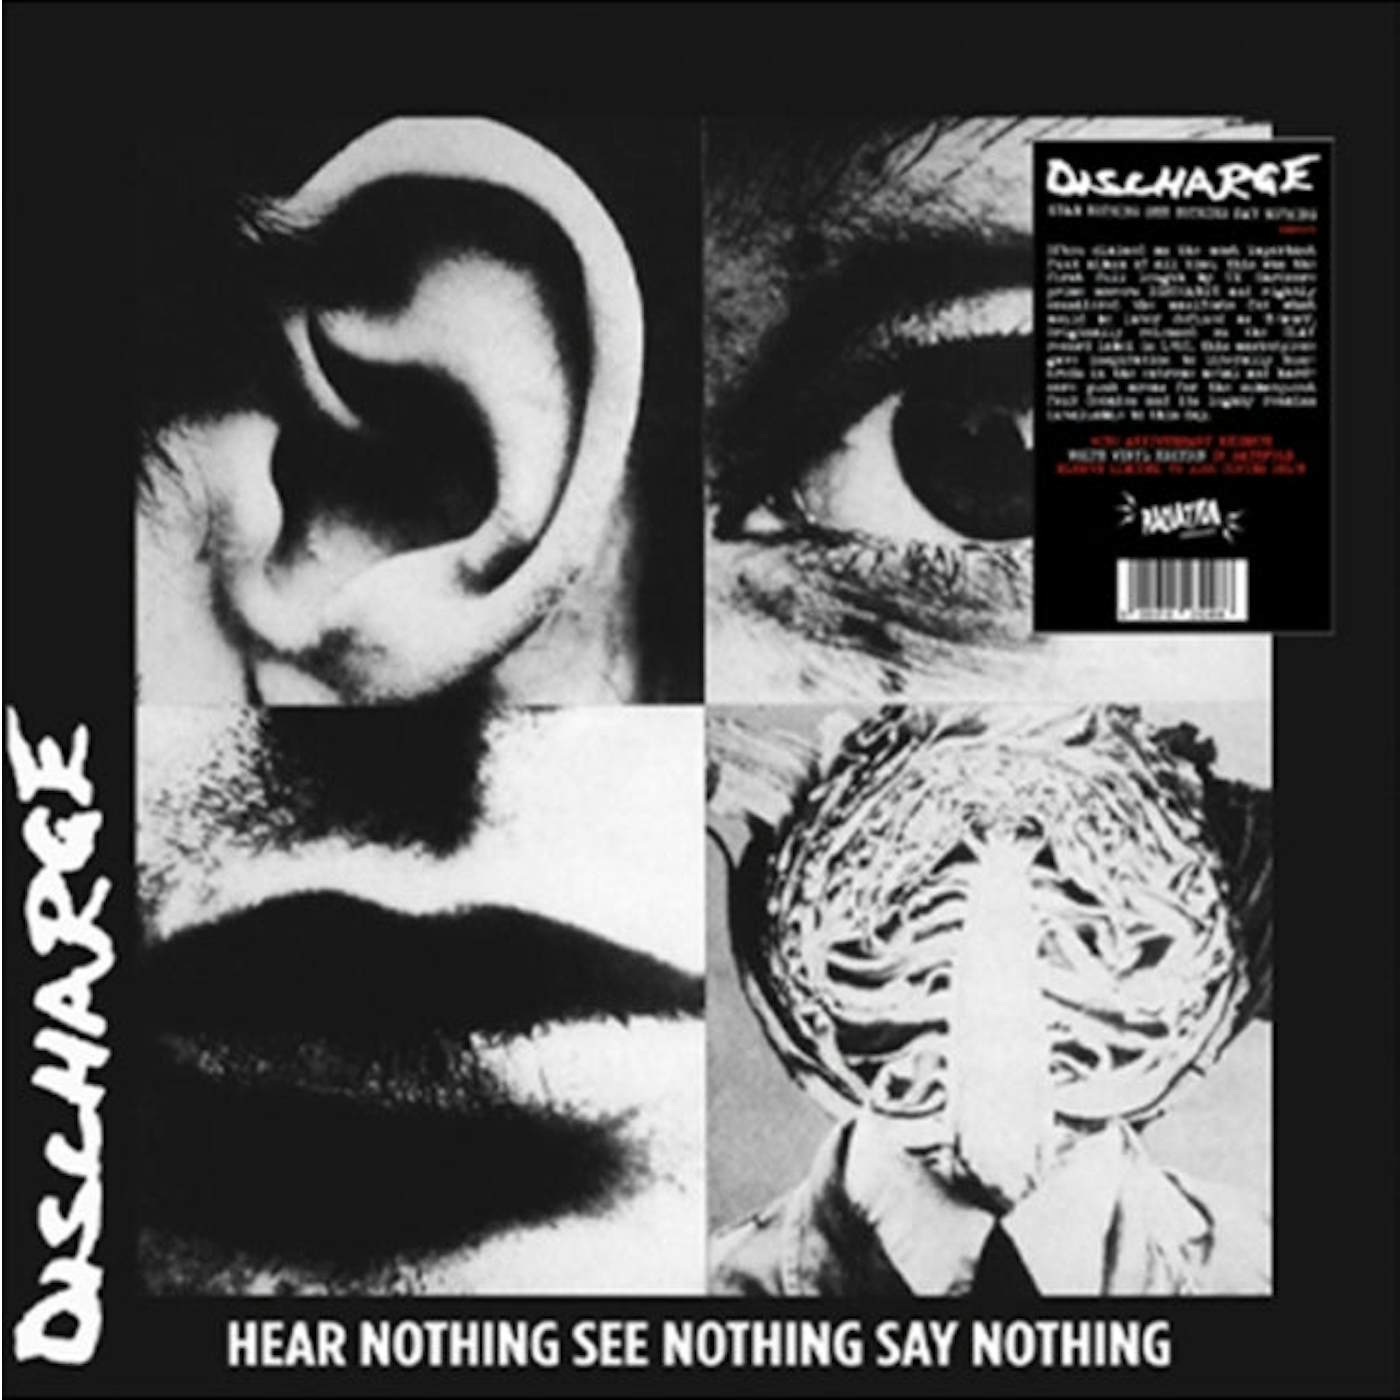 Discharge LP Vinyl Record - Hear Nothing See Nothing Say Nothing (White Vinyl)